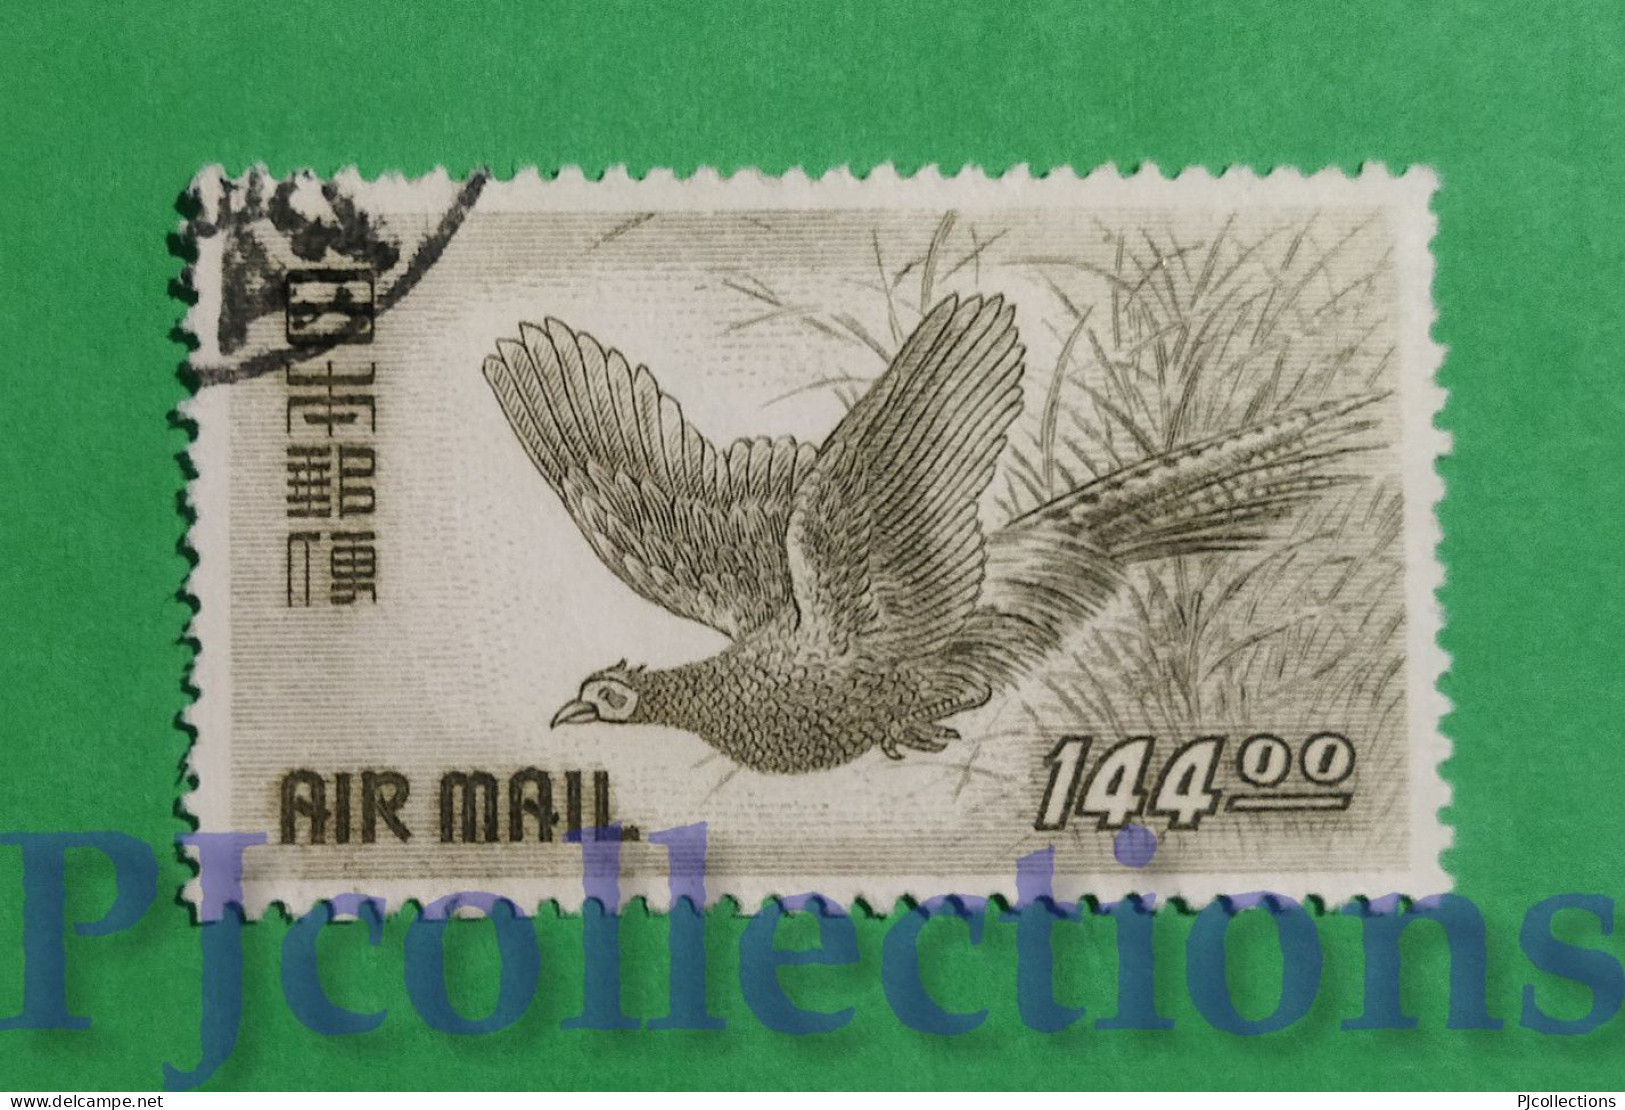 S595 - GIAPPONE - JAPAN 1950 POSTA AEREA - AIRMAIL 144y USATO - USED - Oblitérés